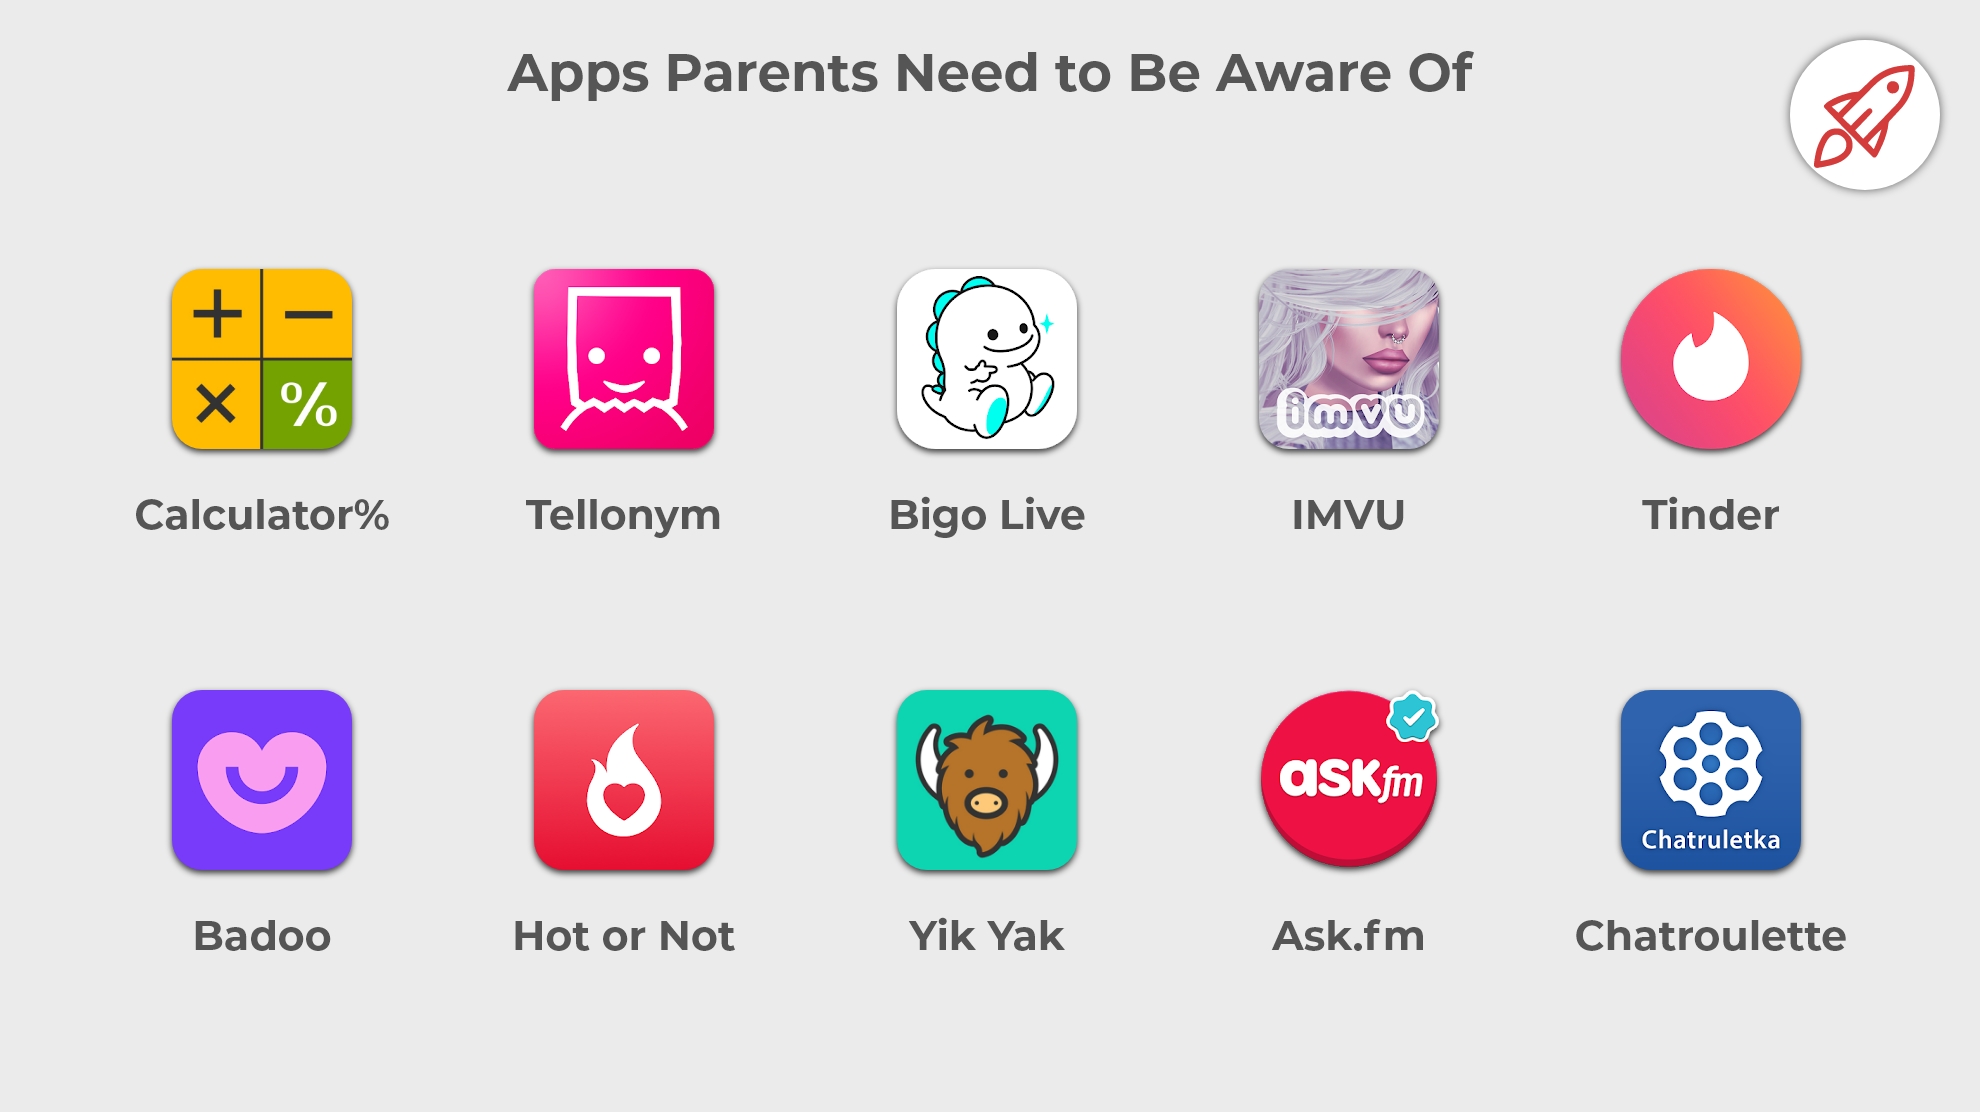 The 14 Apps and Social Media Sites Parents Need to be Aware Of - BroadbandSearch